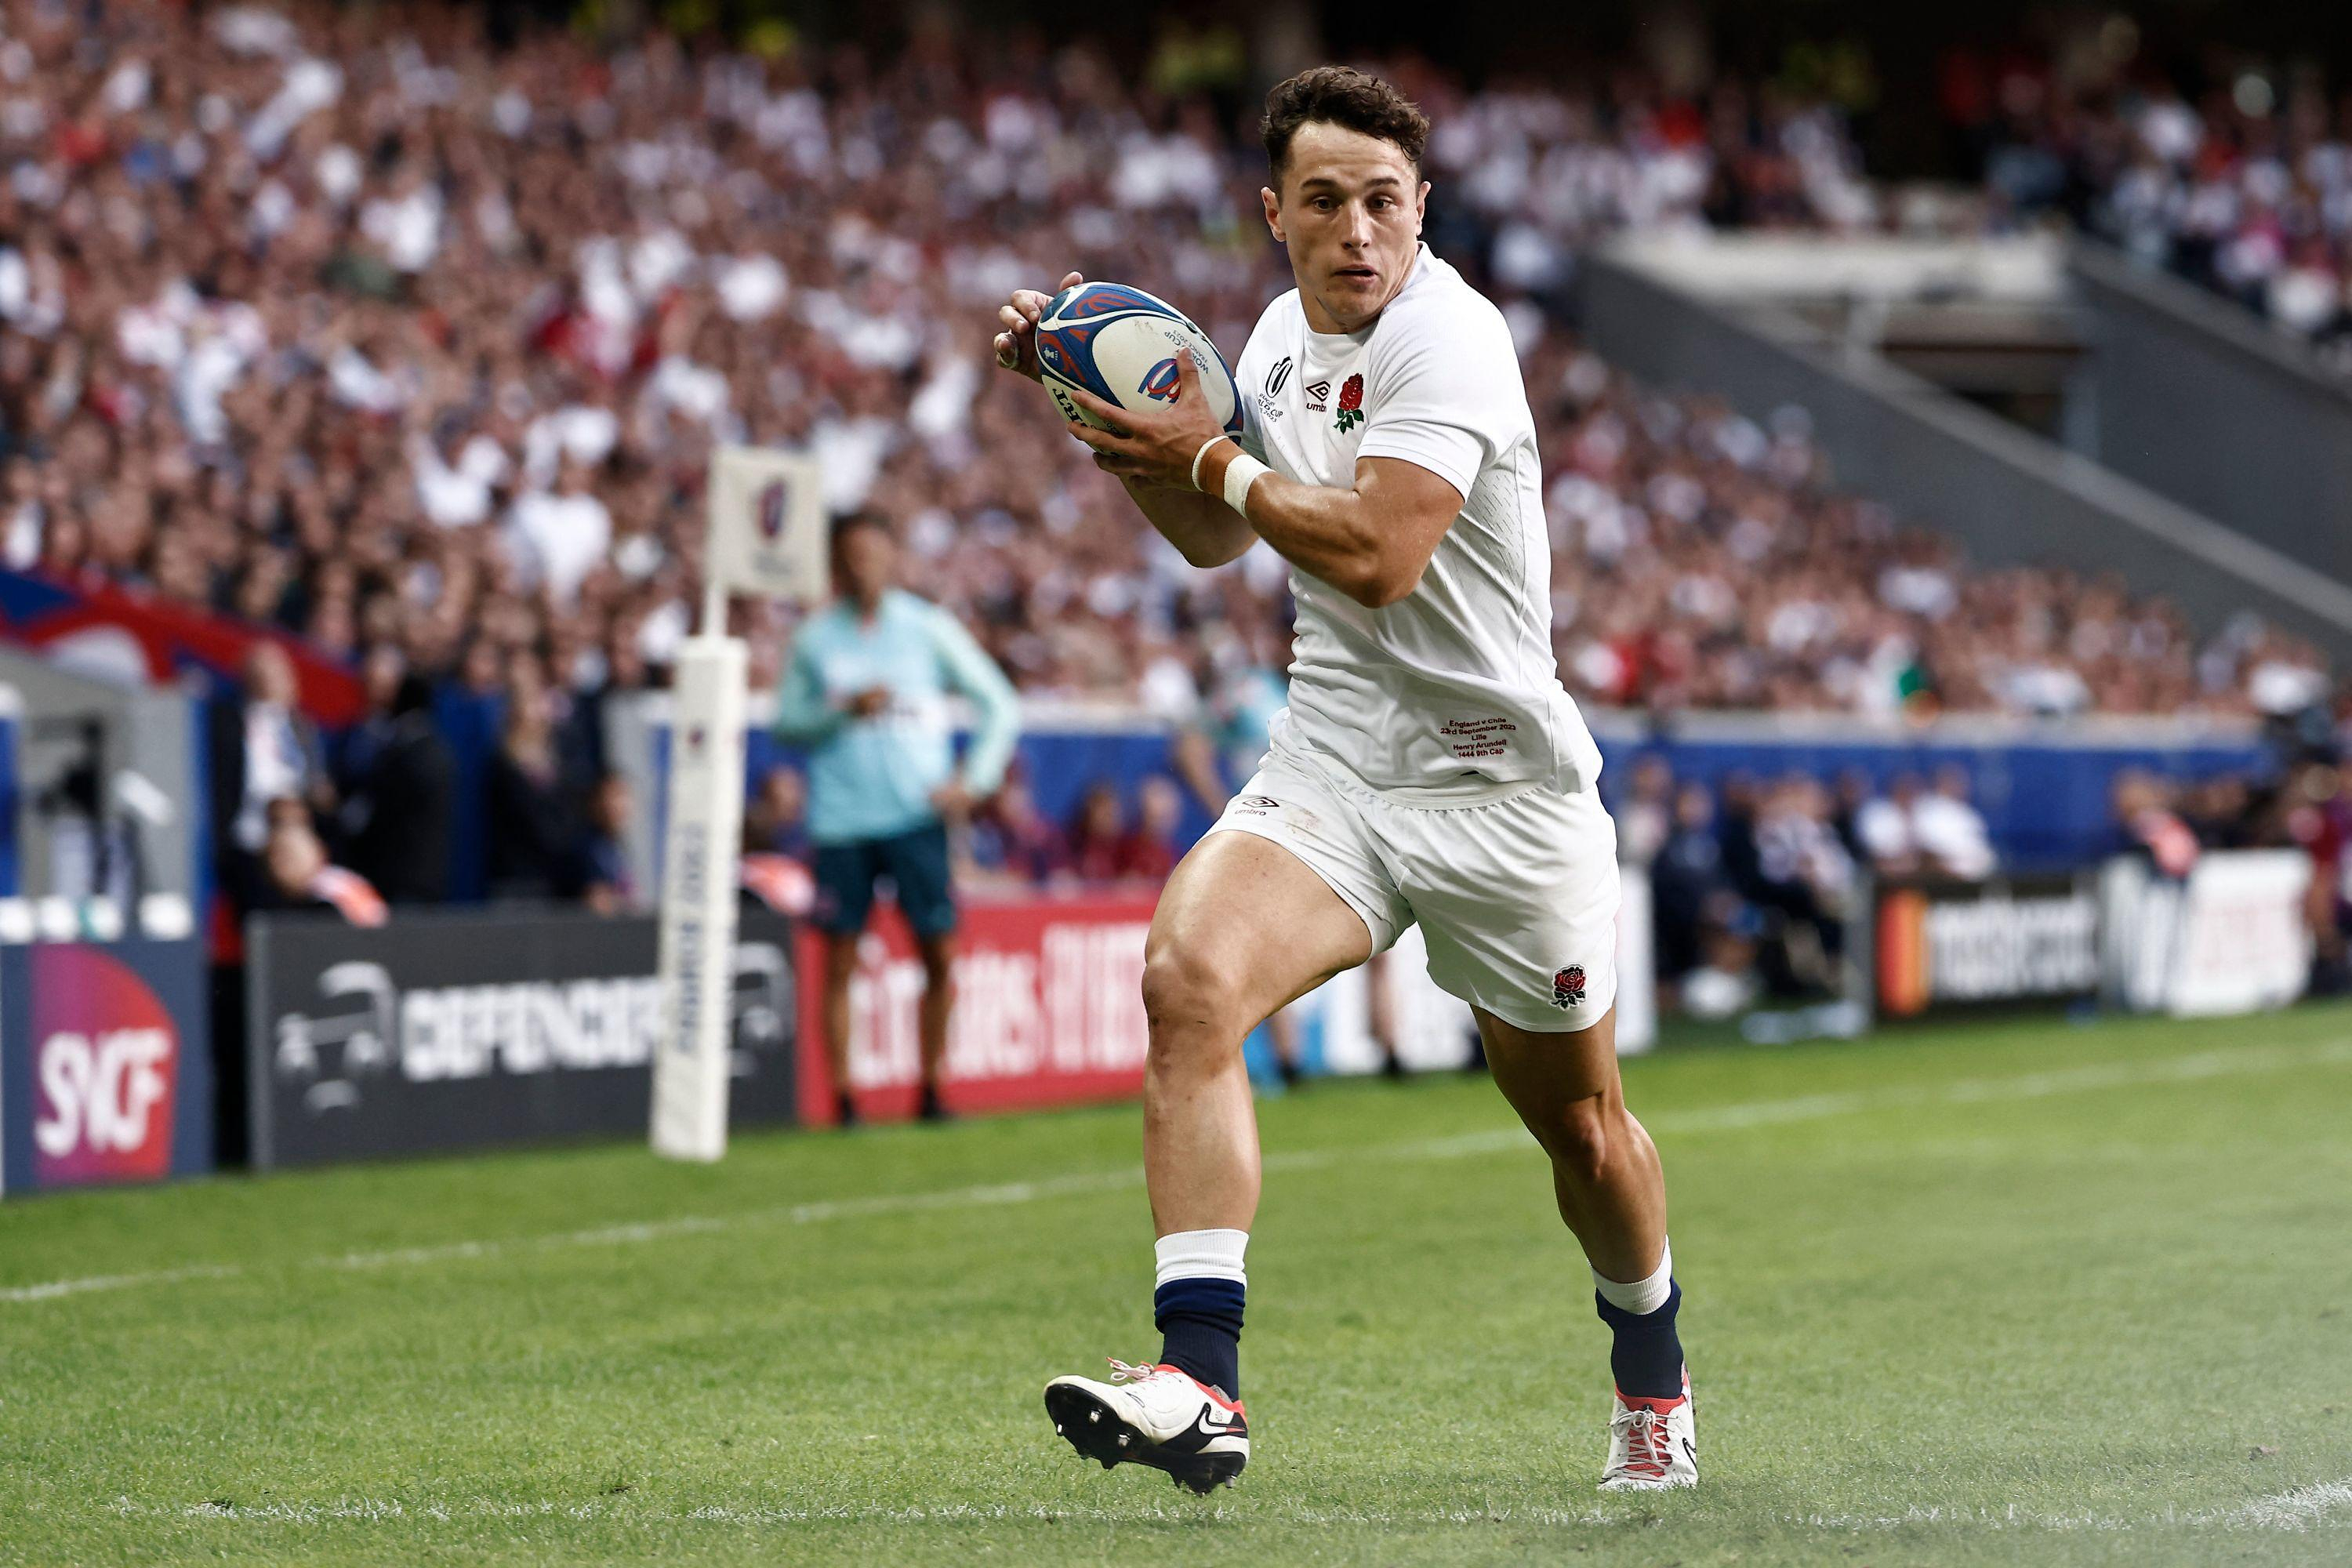 Rugby: “He wants to play the 2027 World Cup”, says the English coach about Henry Arundell